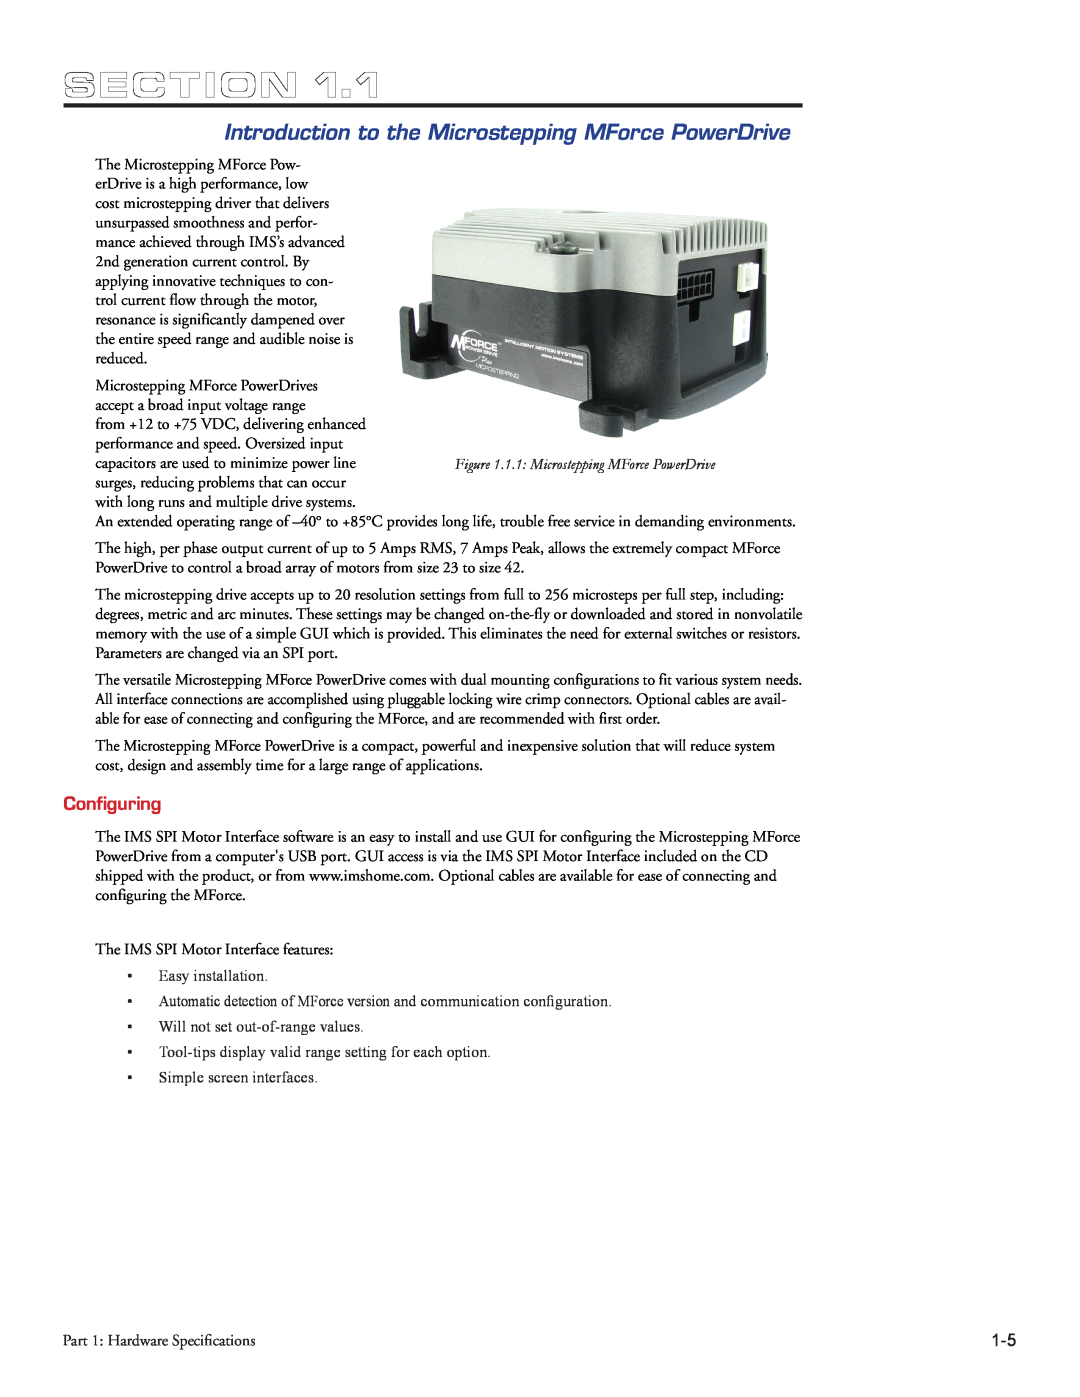 Intelligent Motion Systems Motion Detector operating instructions Section, Configuring 